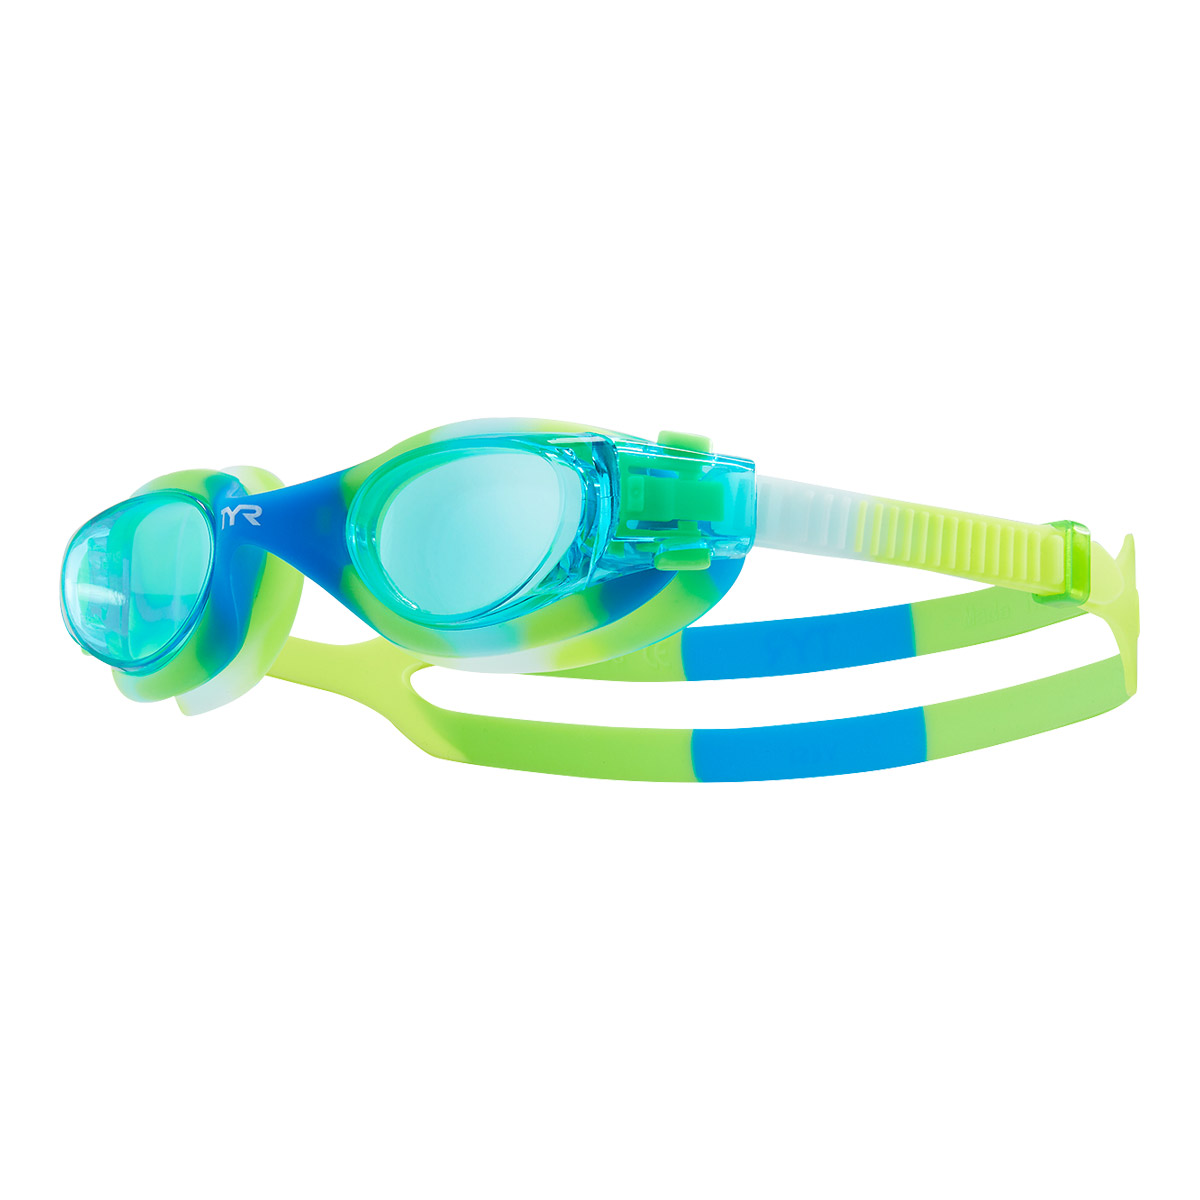 TYR Vesi Tie Dye Youth Fit Goggles - Blue/Green/Yellow